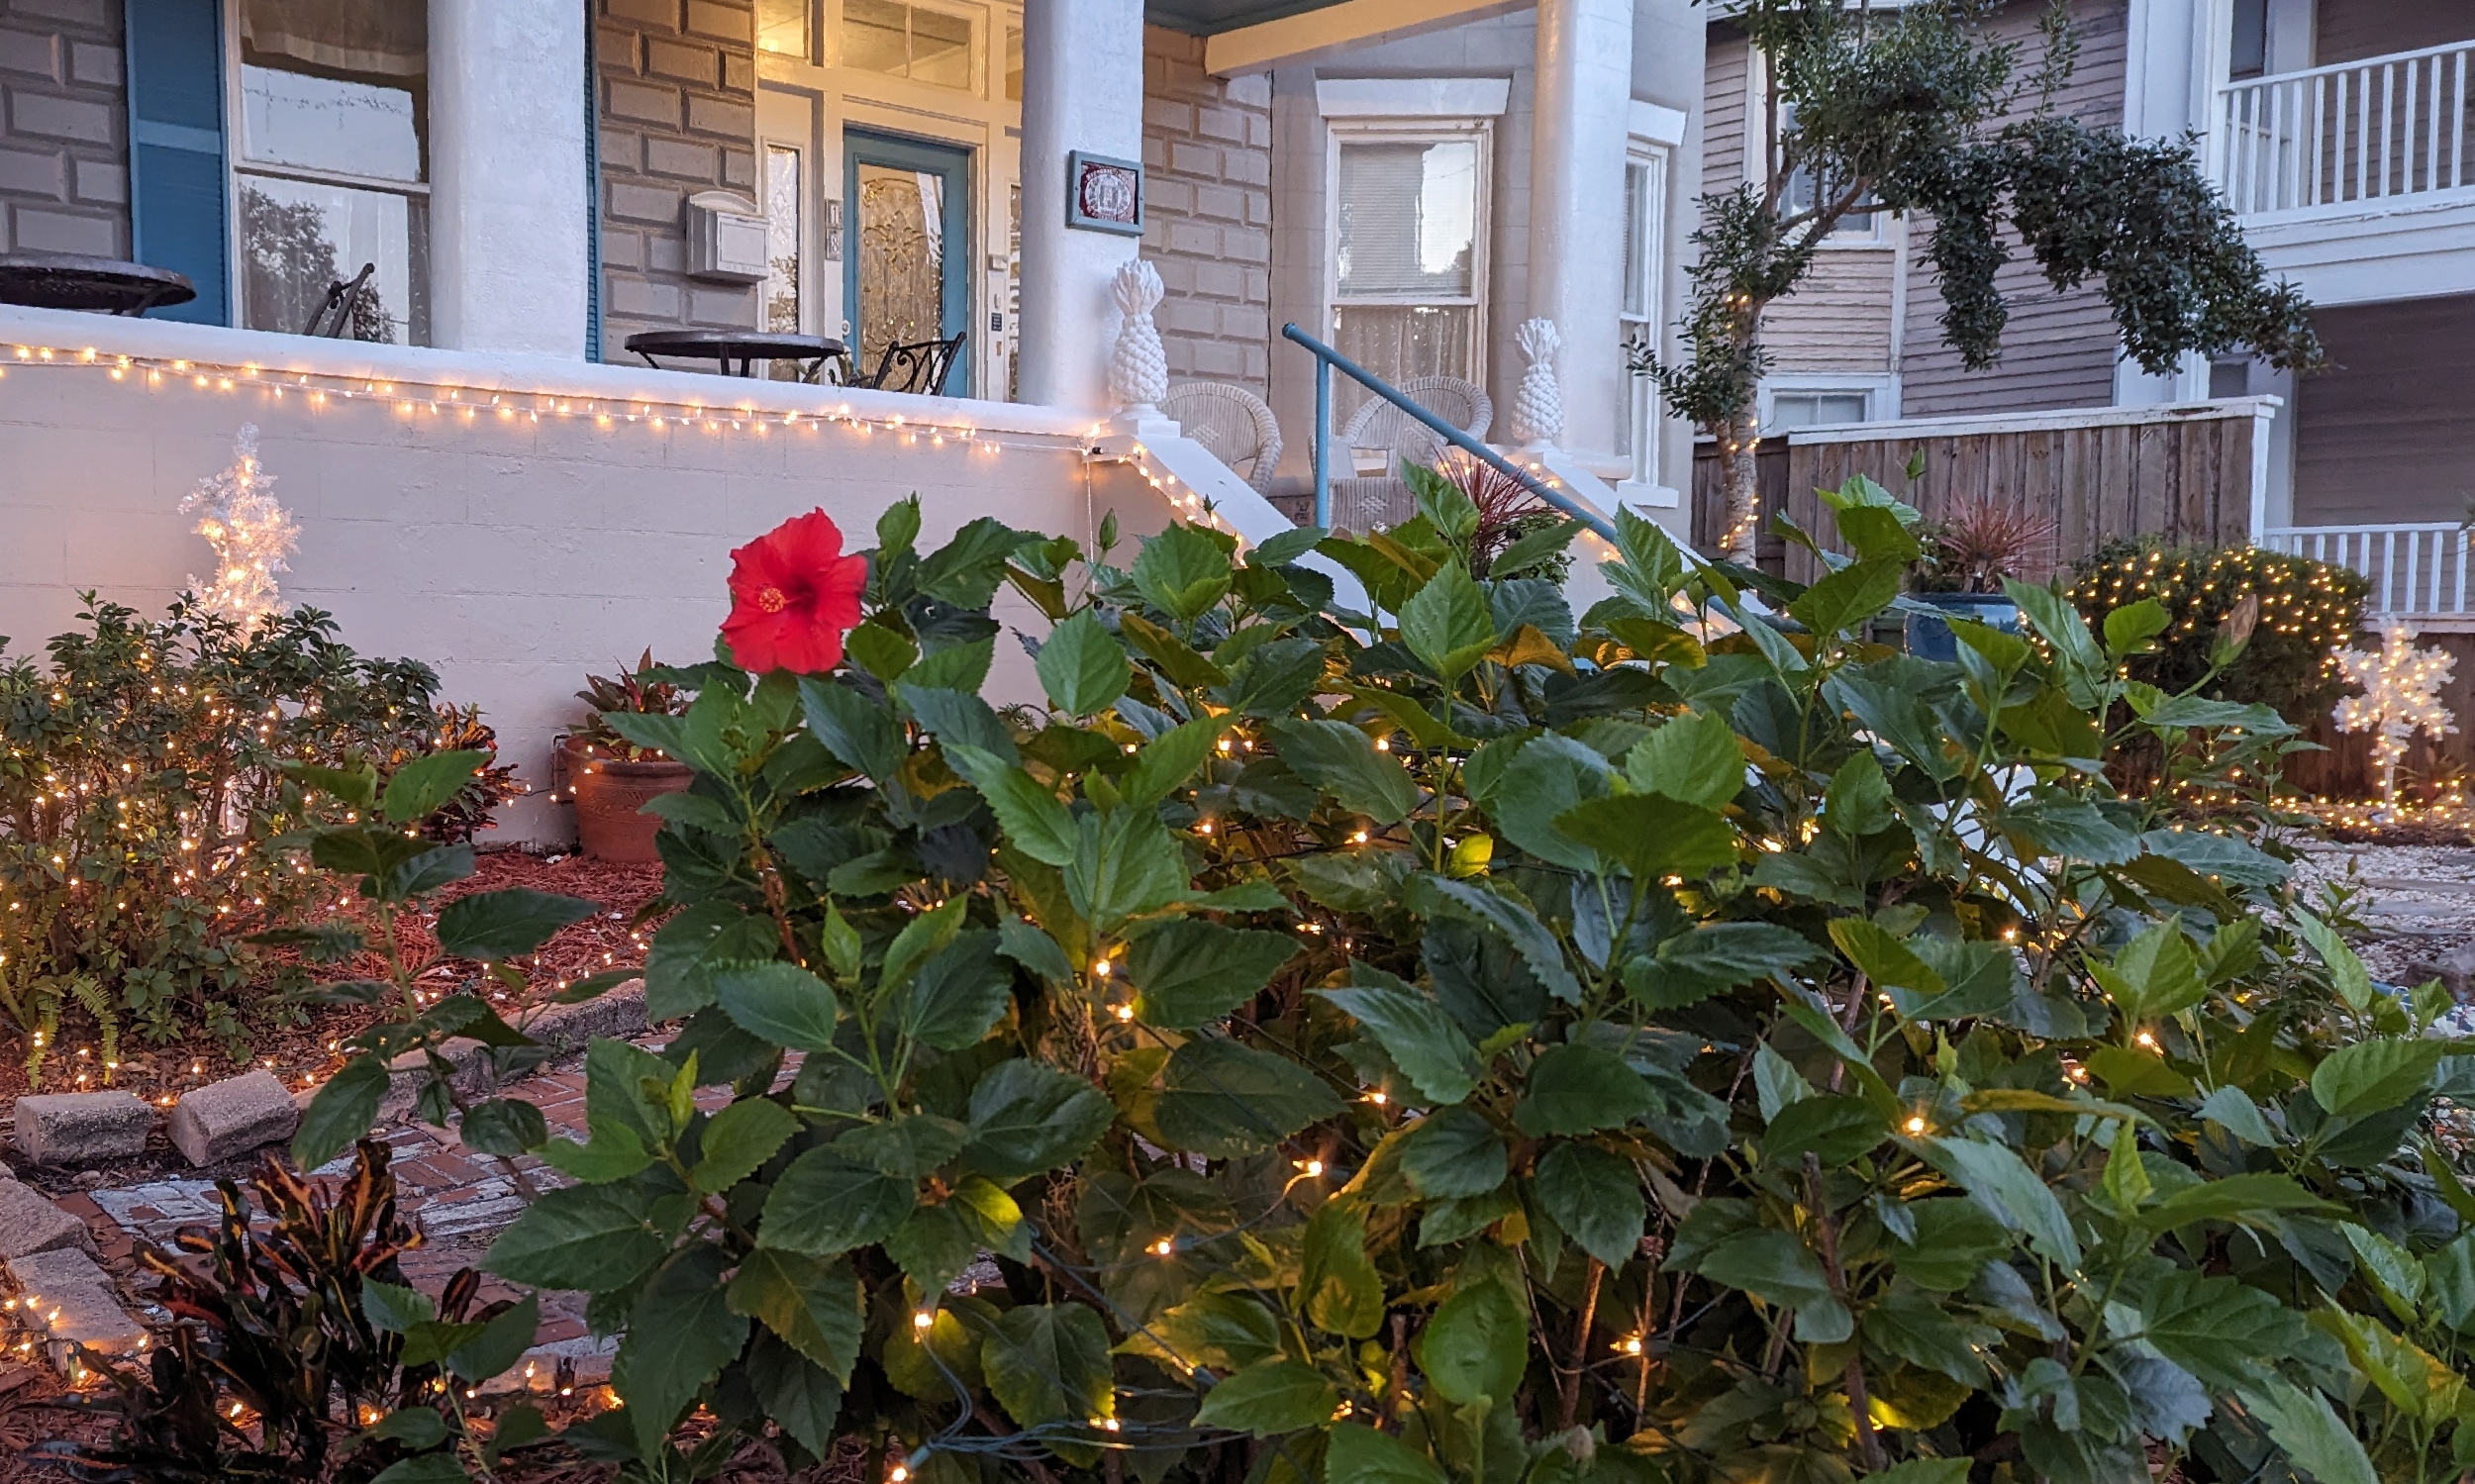 A live hibiscus adds to the lights at this bed and breakfast decorated for the Nights of Lights